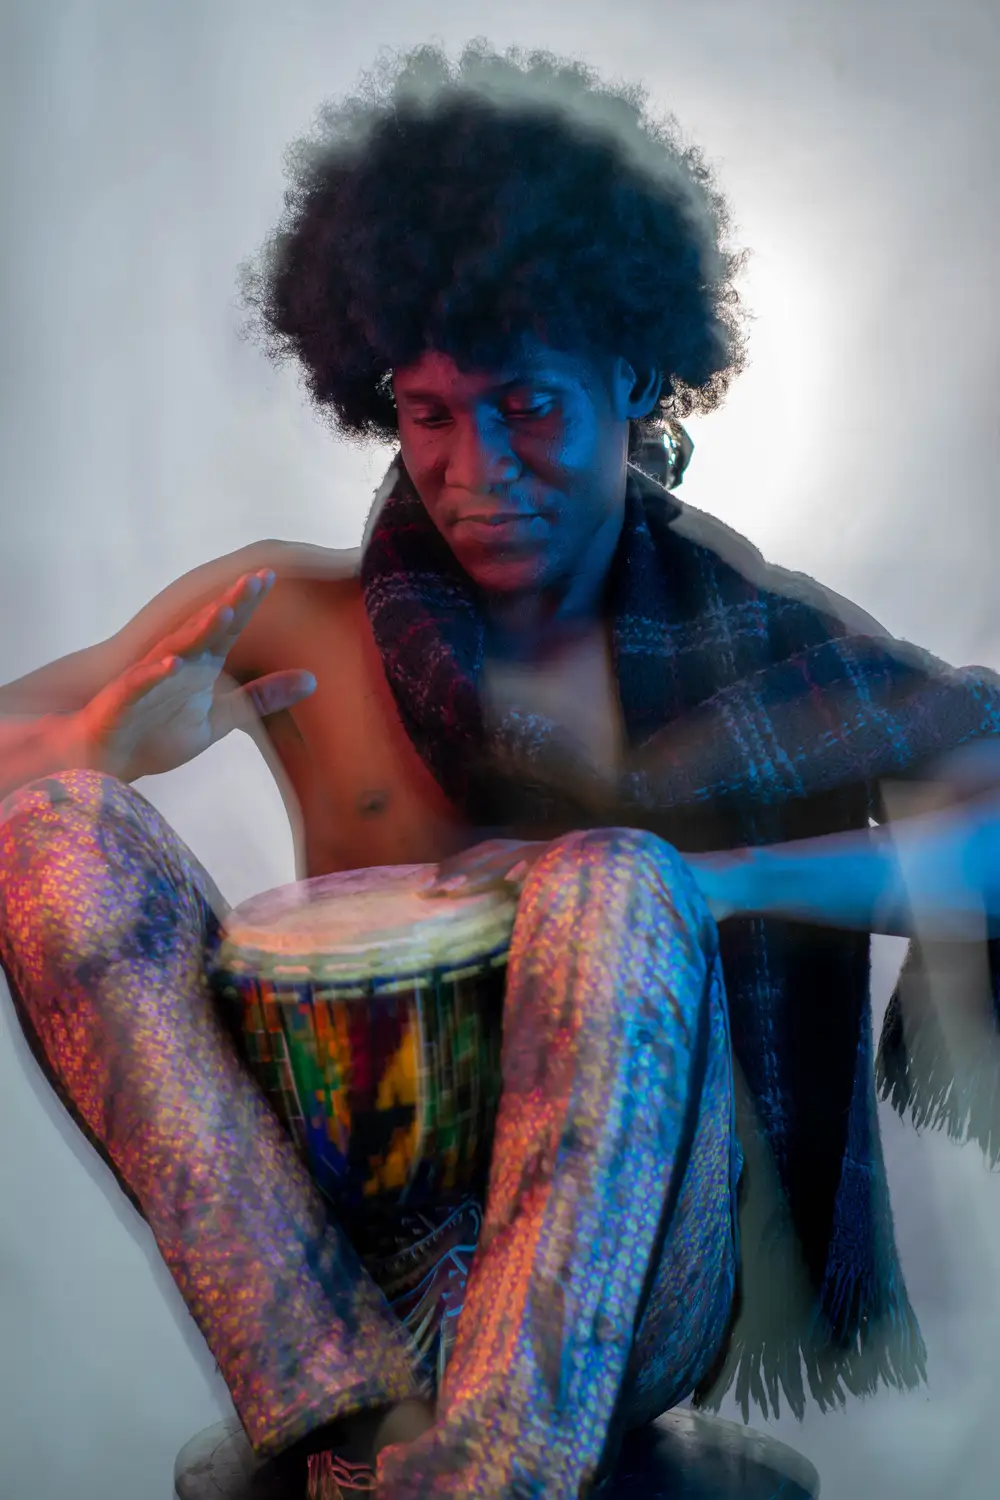 model on afro hairstyle playing his drum